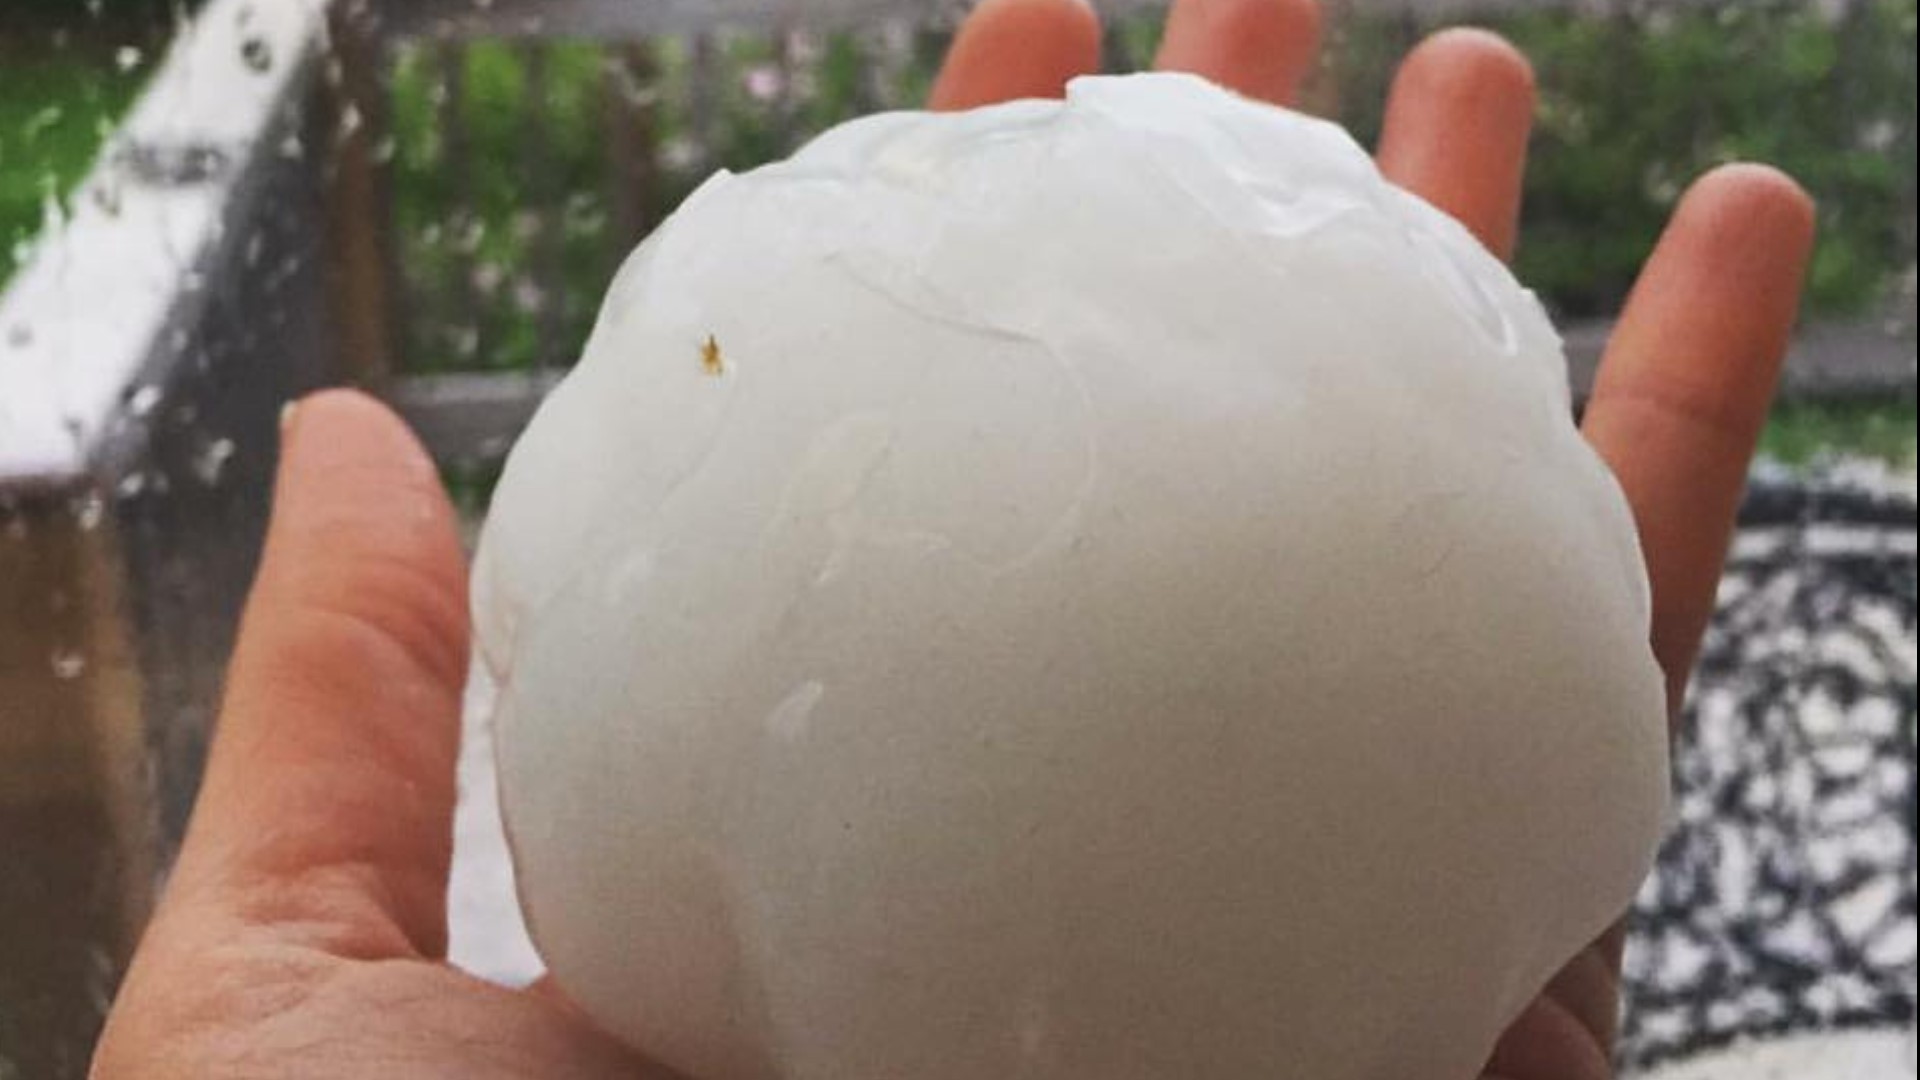 Damaging thunderstorms with large hail were forecast 36 hours prior to the record breaking hailstorm on May 8, 2017.